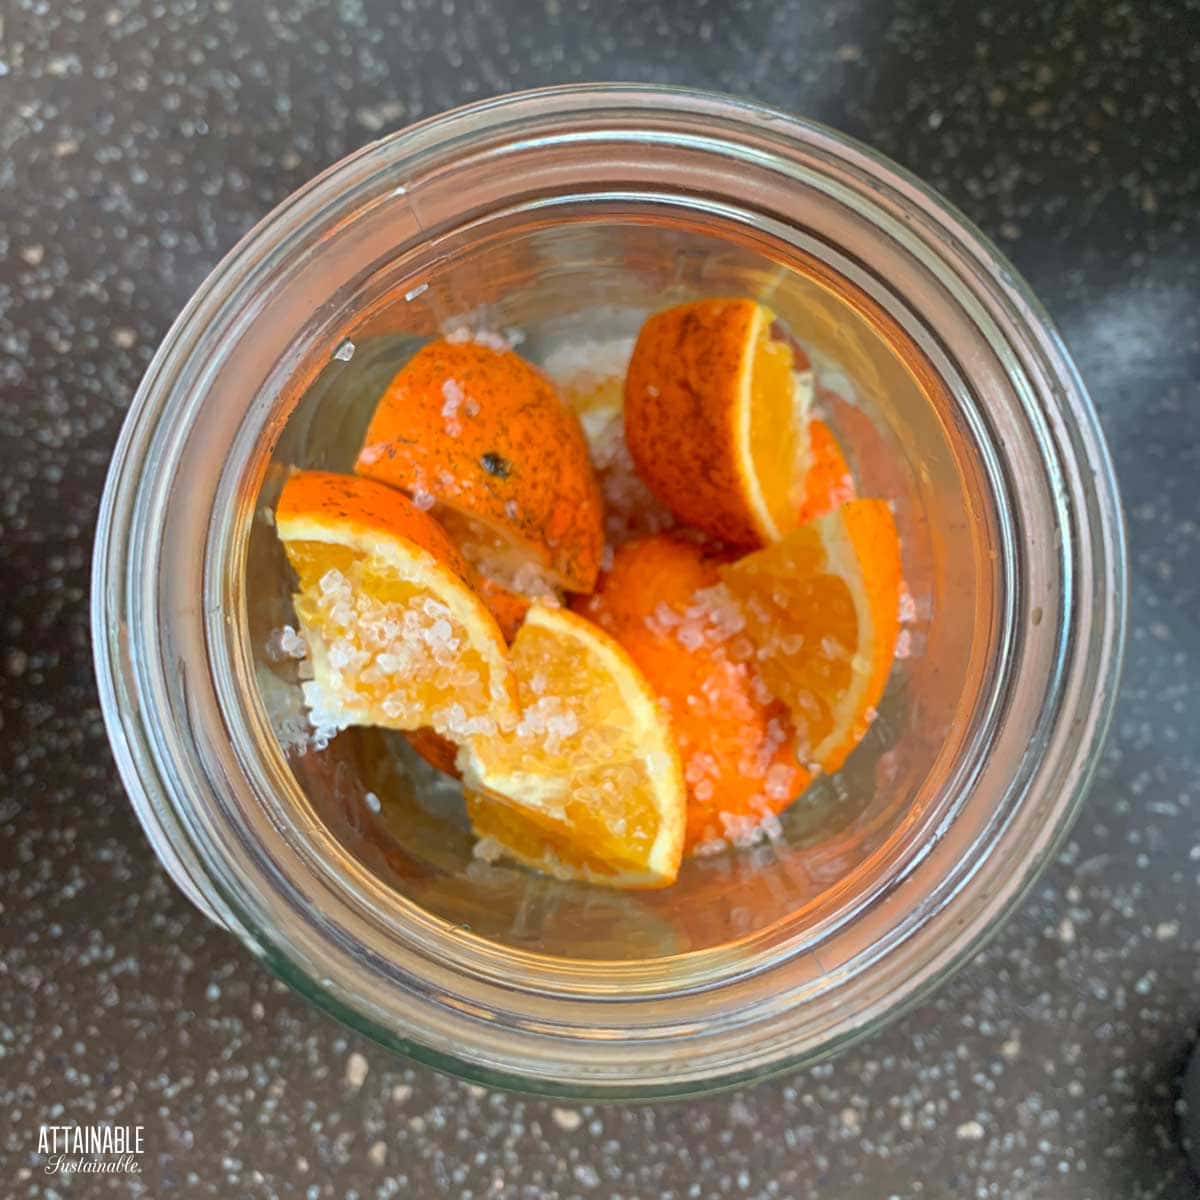 pieces of orange inside a glass jar from above.